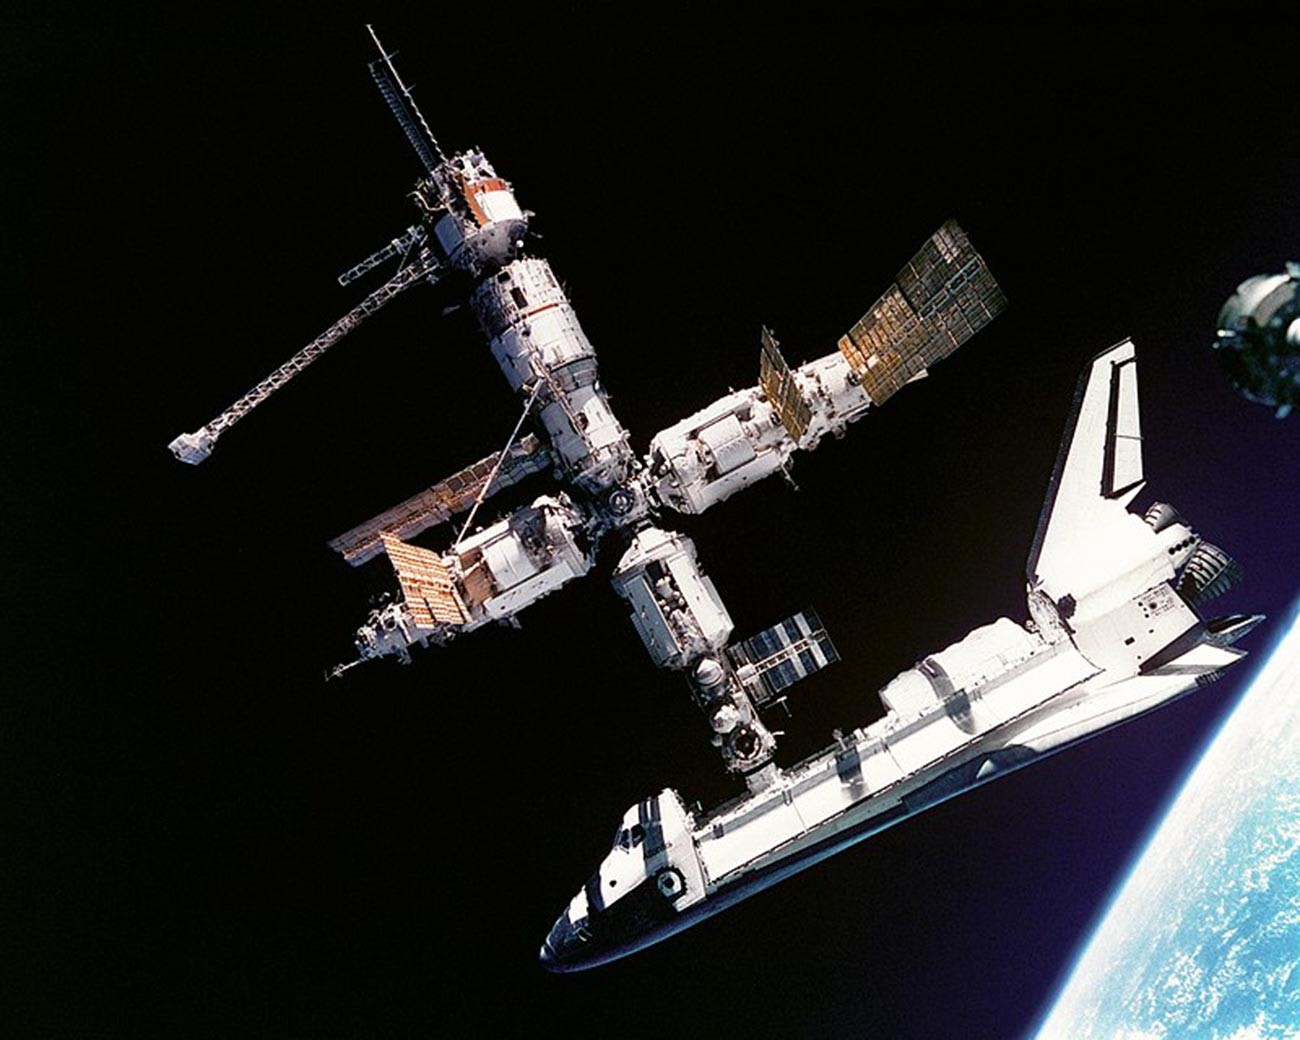 This view of the Space Shuttle Atlantis still connected to Russia's Mir Space Station was photographed by the Mir-19 crew on July 4, 1995.